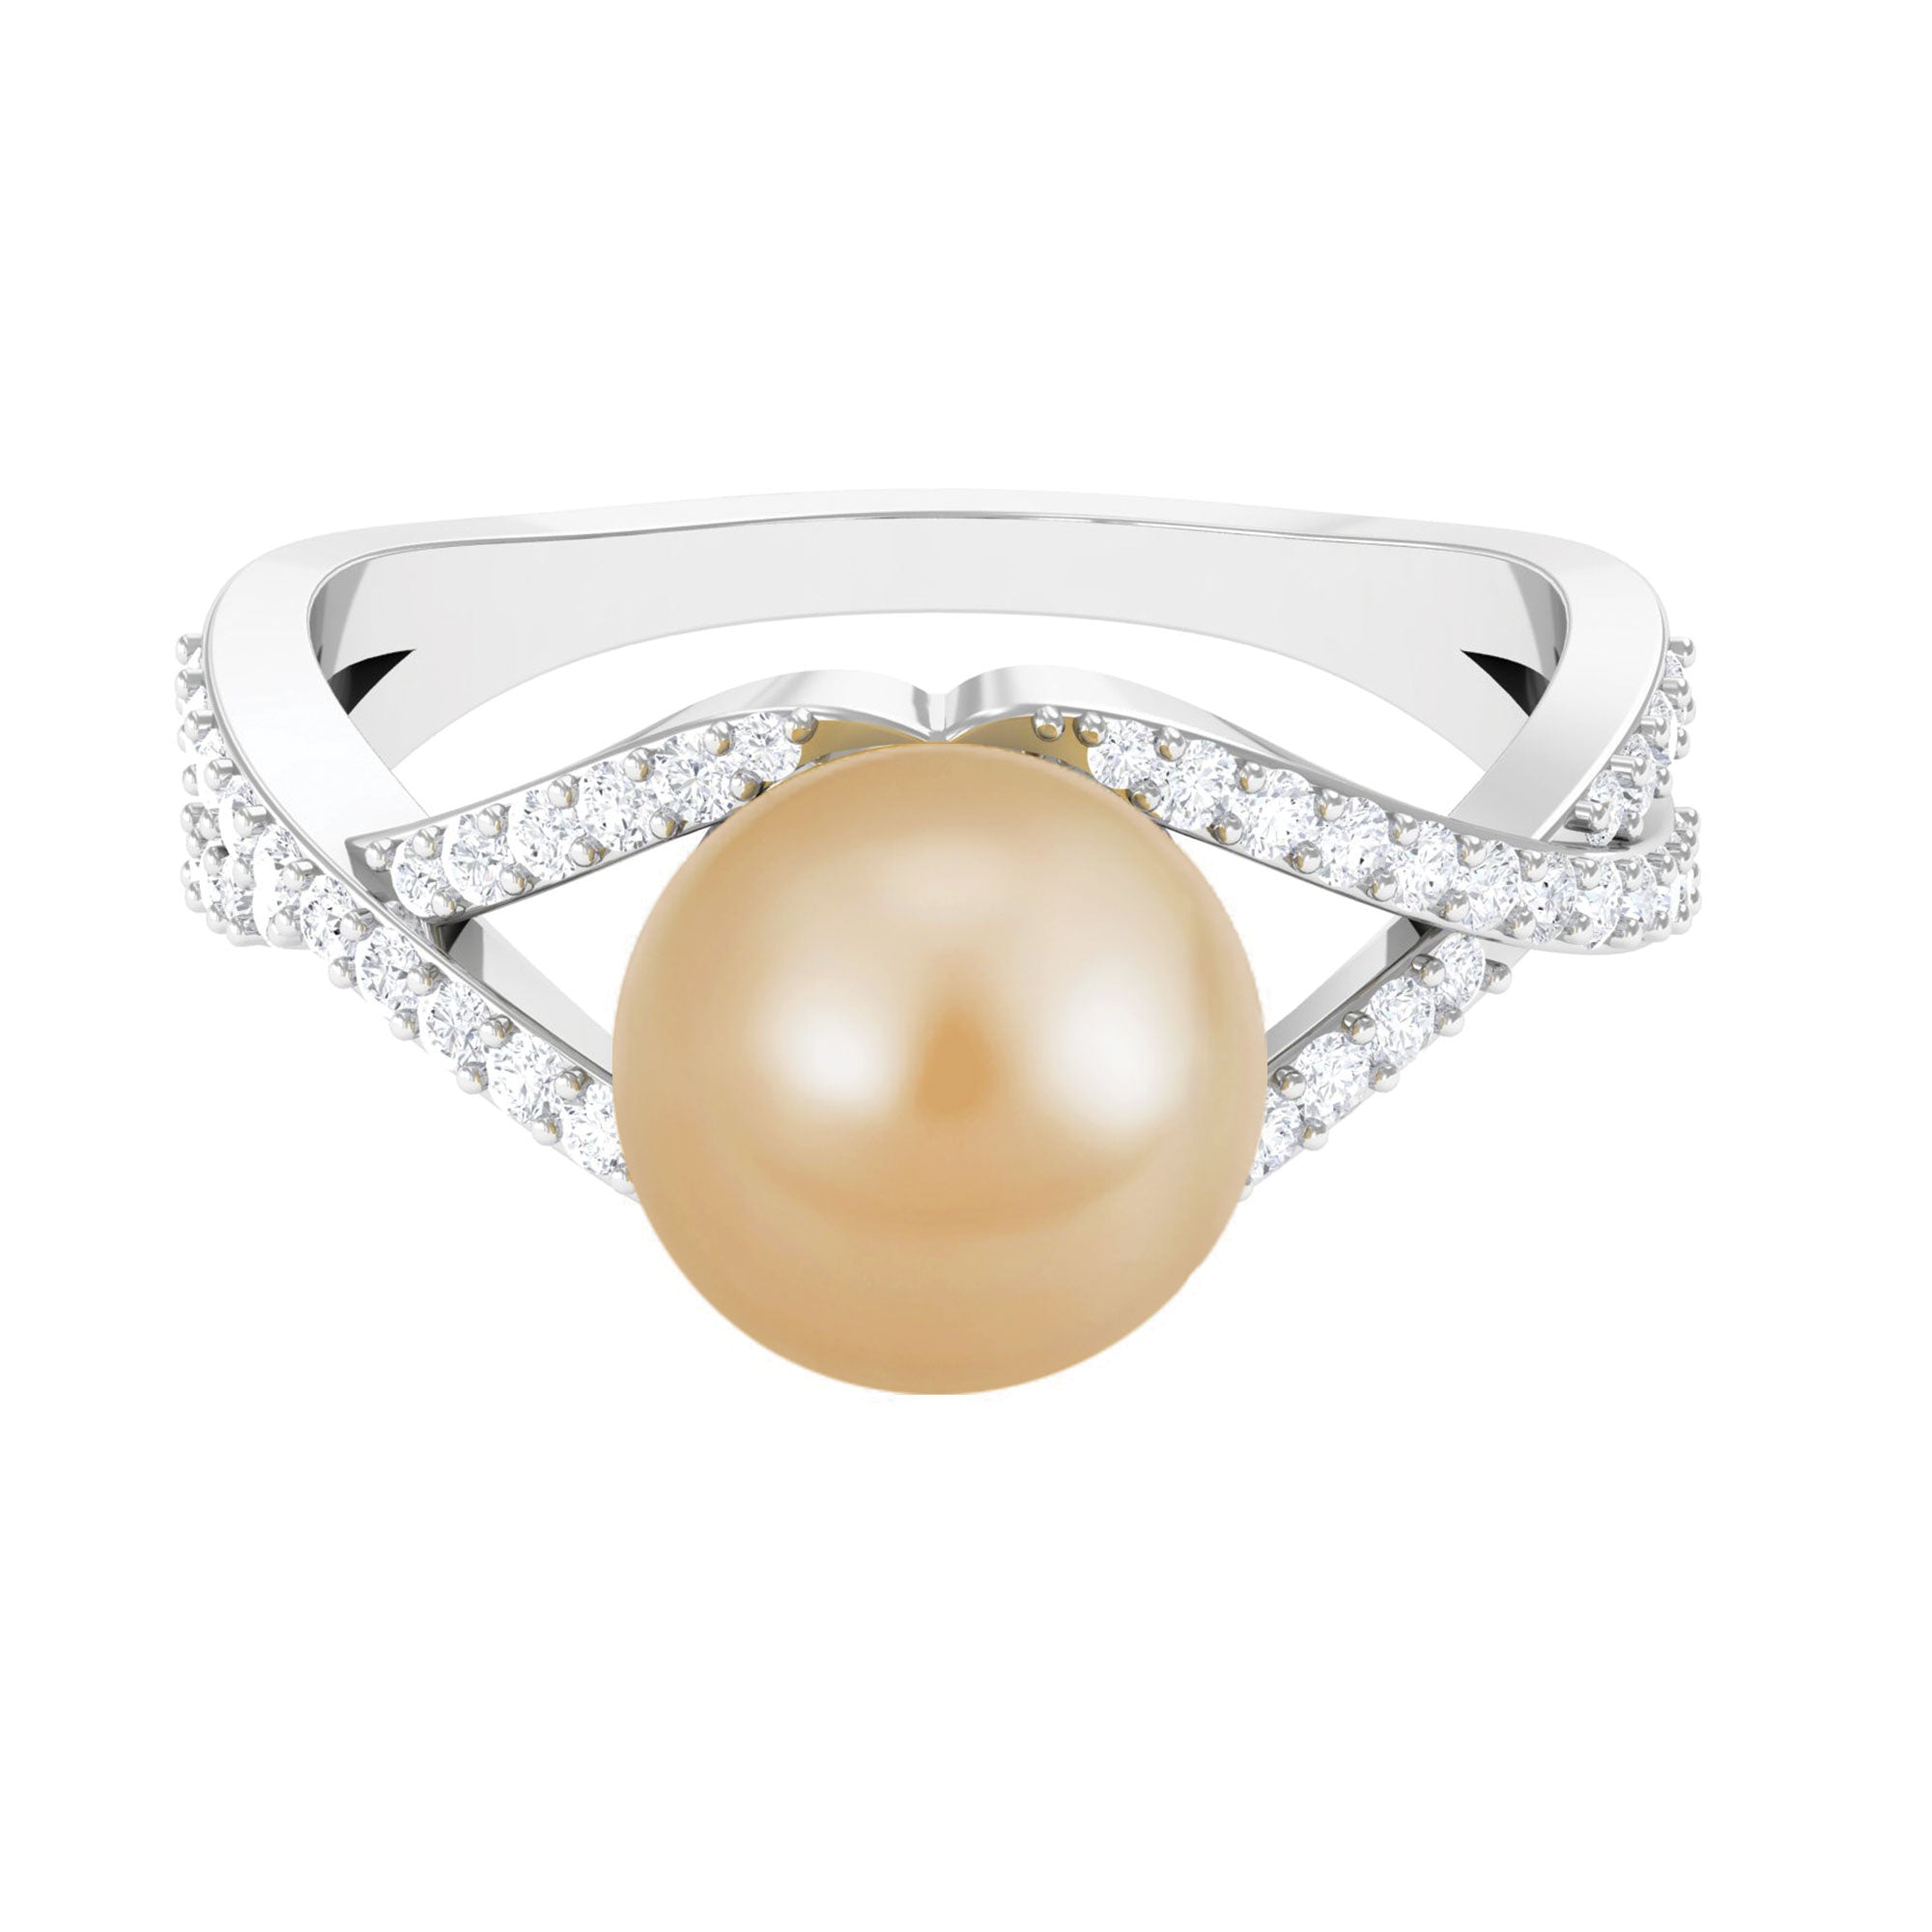 South Sea Pearl Solitaire Crossover Ring with Diamond South Sea Pearl-AAA Quality - Arisha Jewels